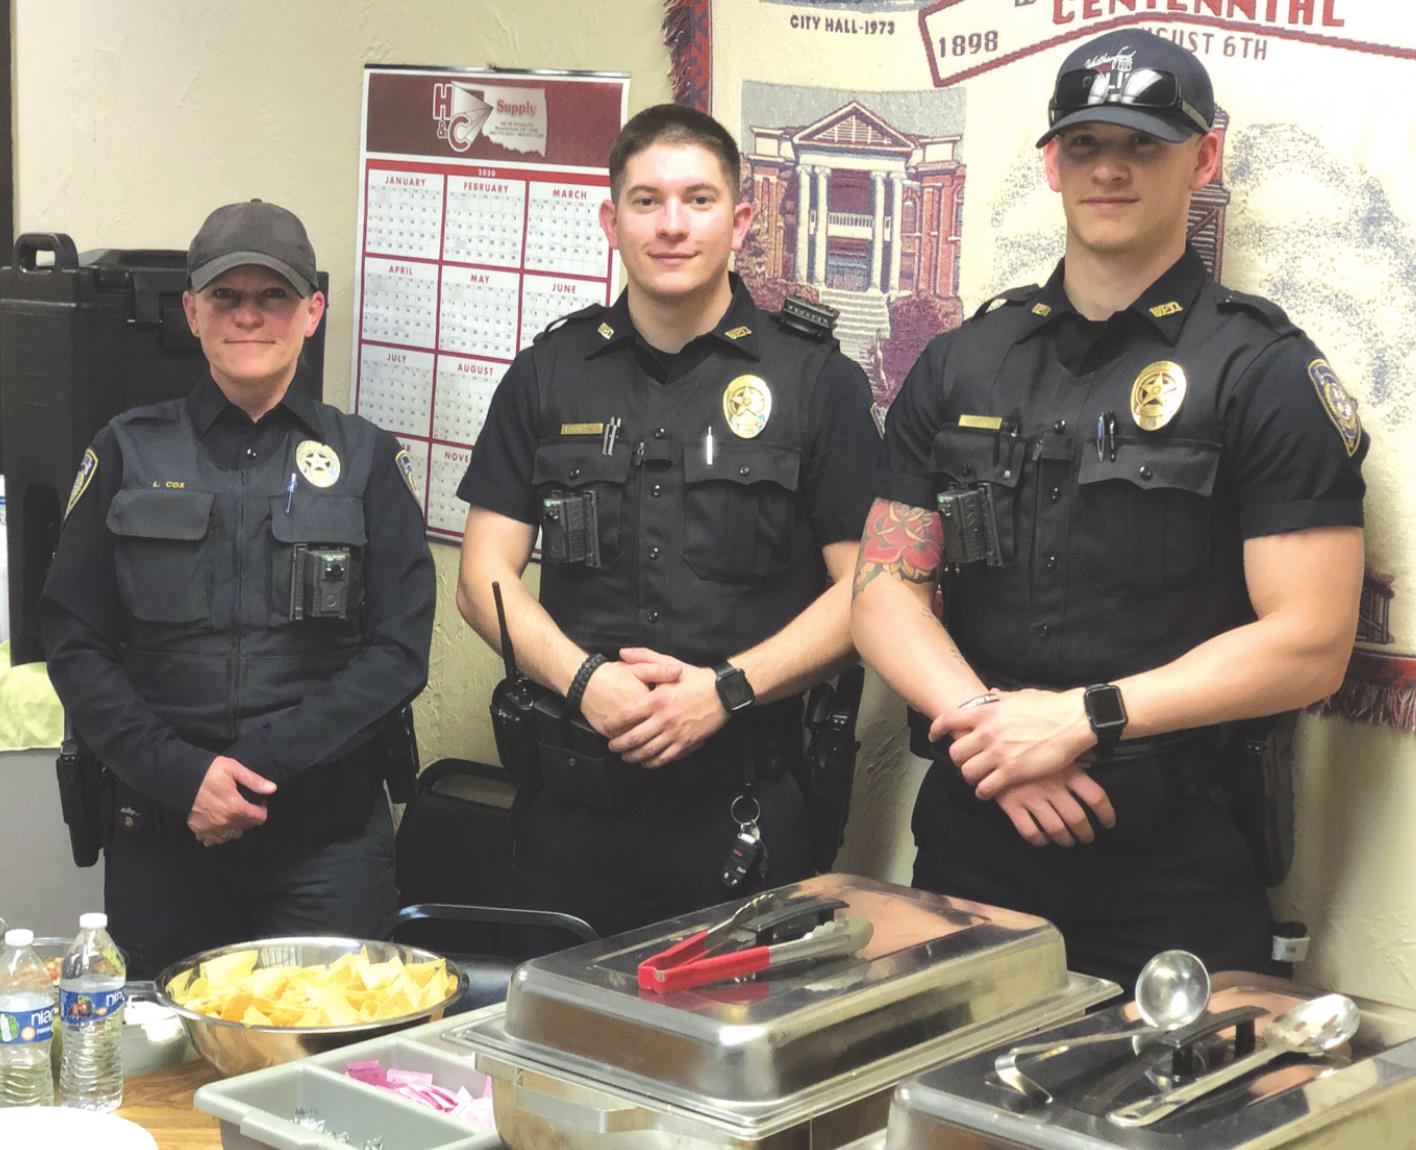 Provided Pictured above, members of the Weatherford Police Department from left are Lt. Laura Cox and Officers Colby Vaughan and Derek Beck. The Growing Wellness and Wellness Joint provided WPD with a “thank you” meal earlier this week to honor their service.